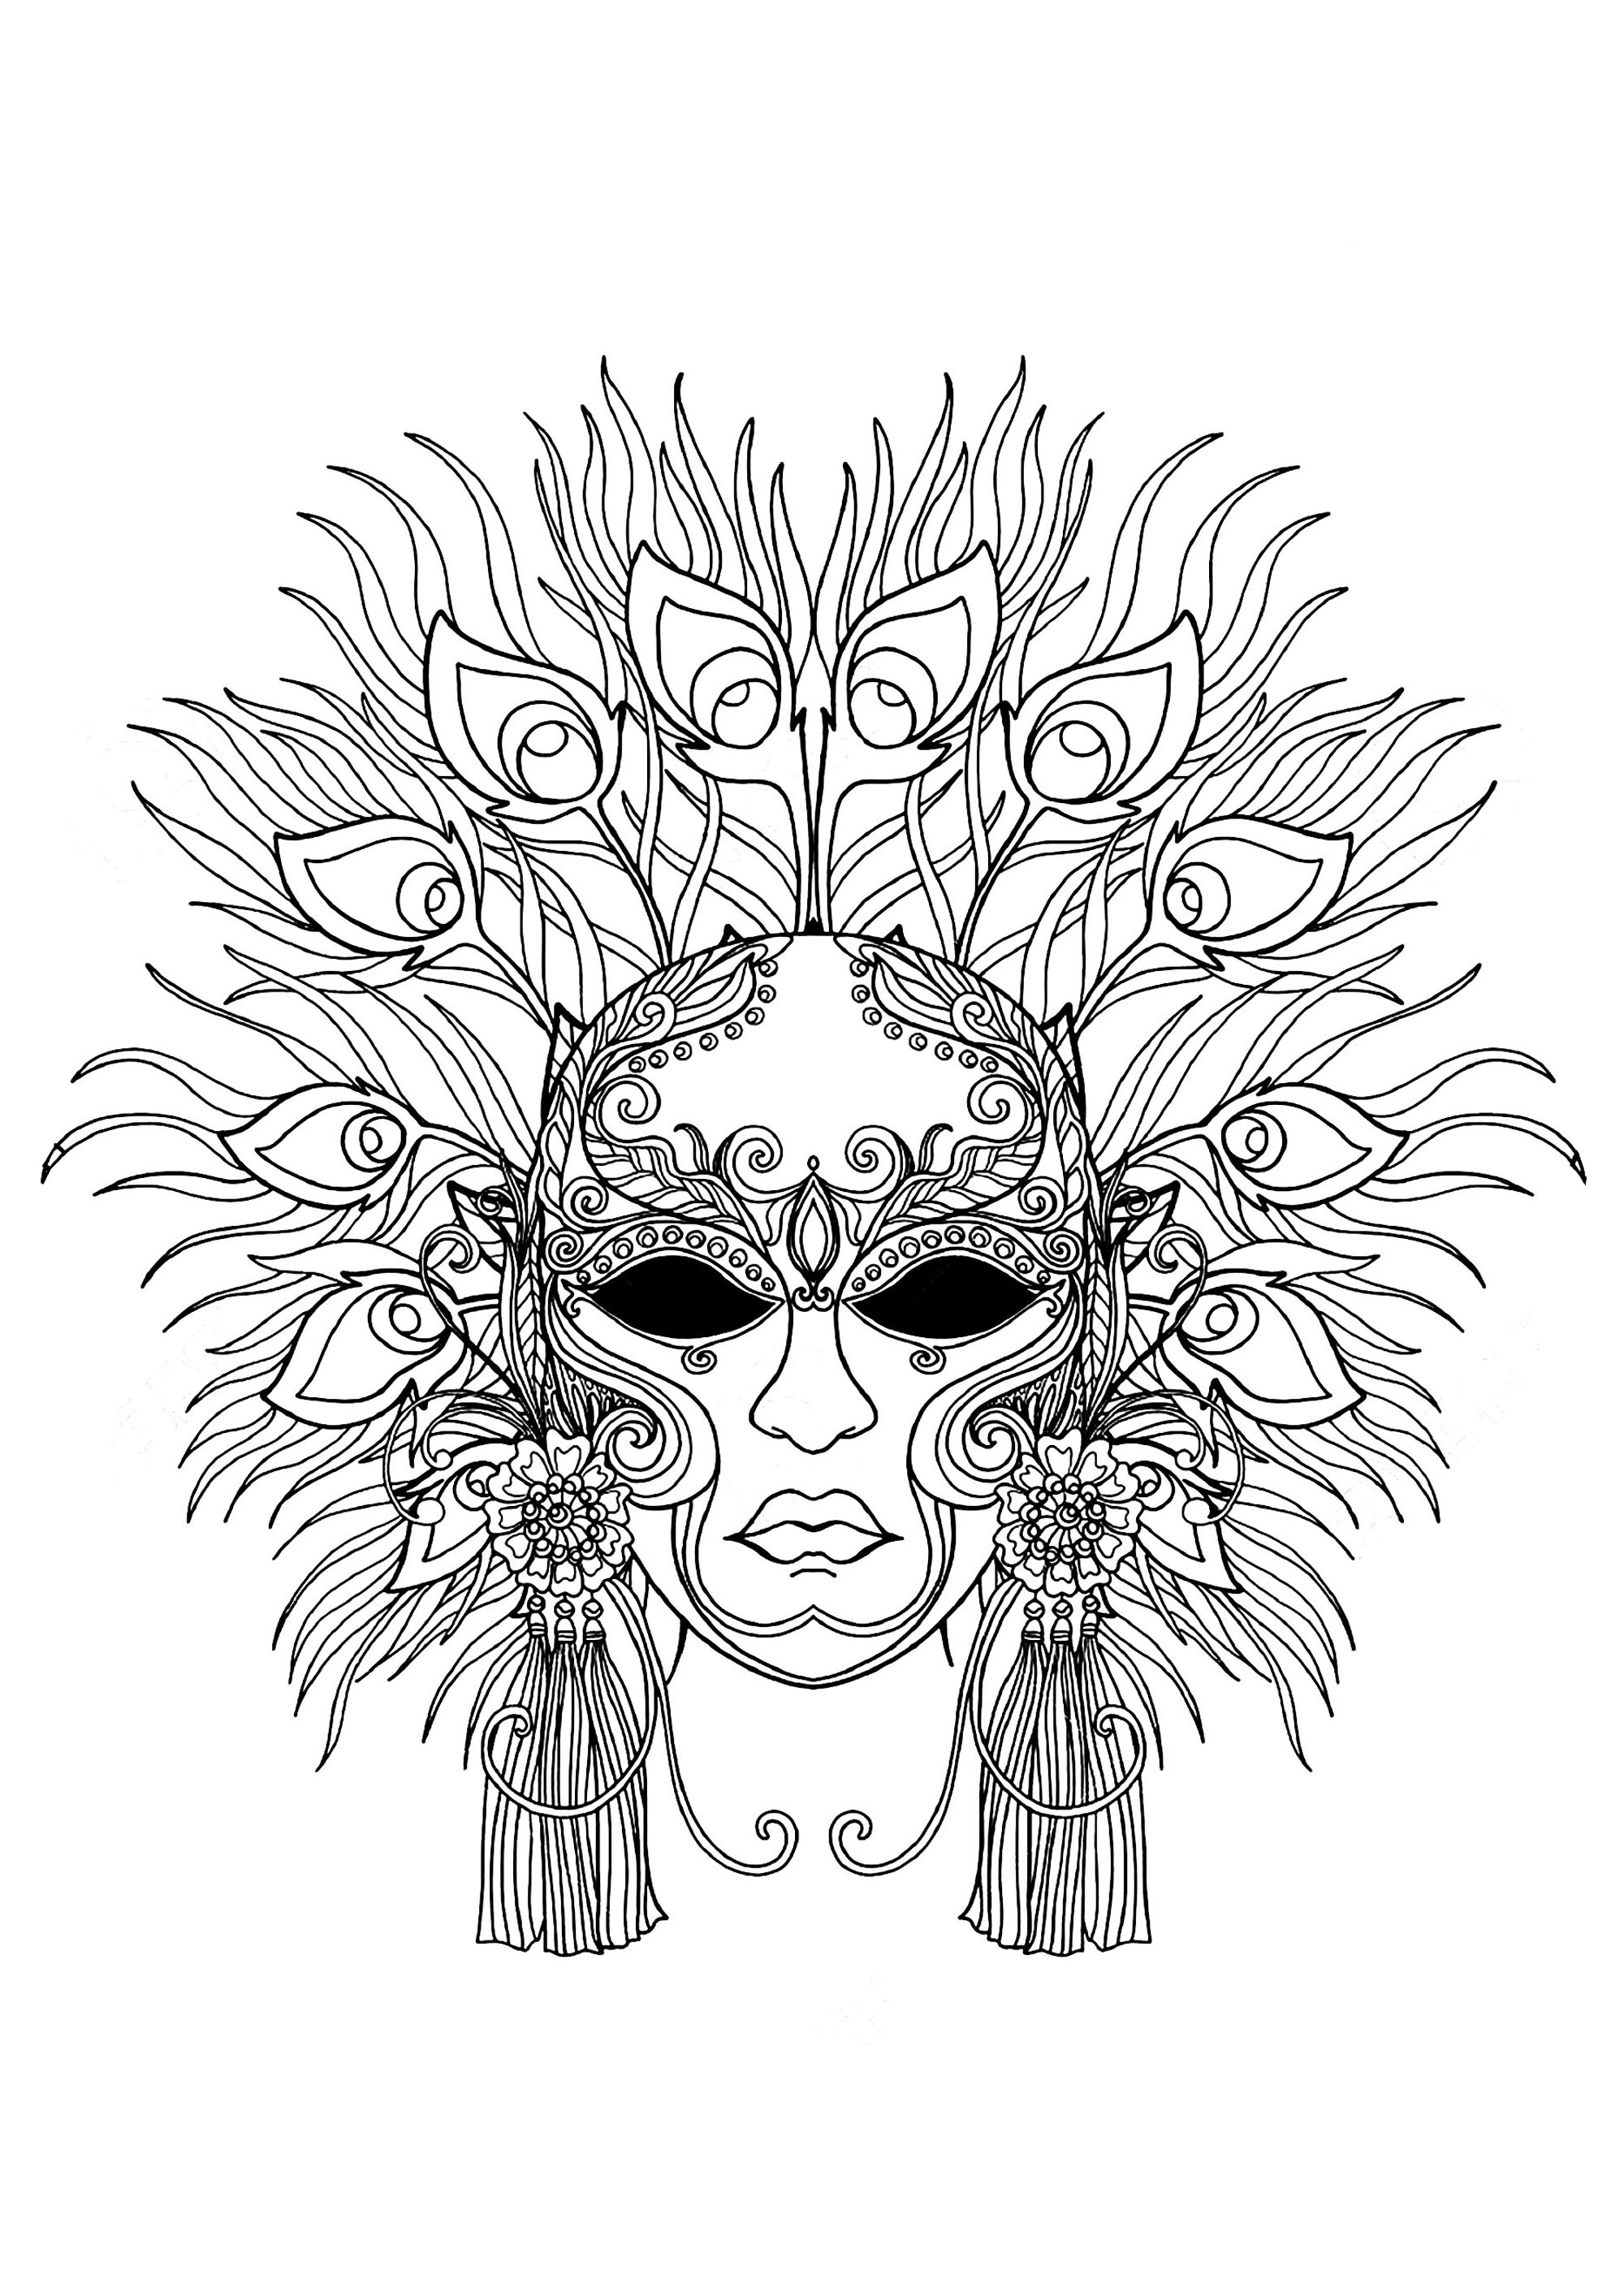 Download Carnival to color for children - Carnival Kids Coloring Pages